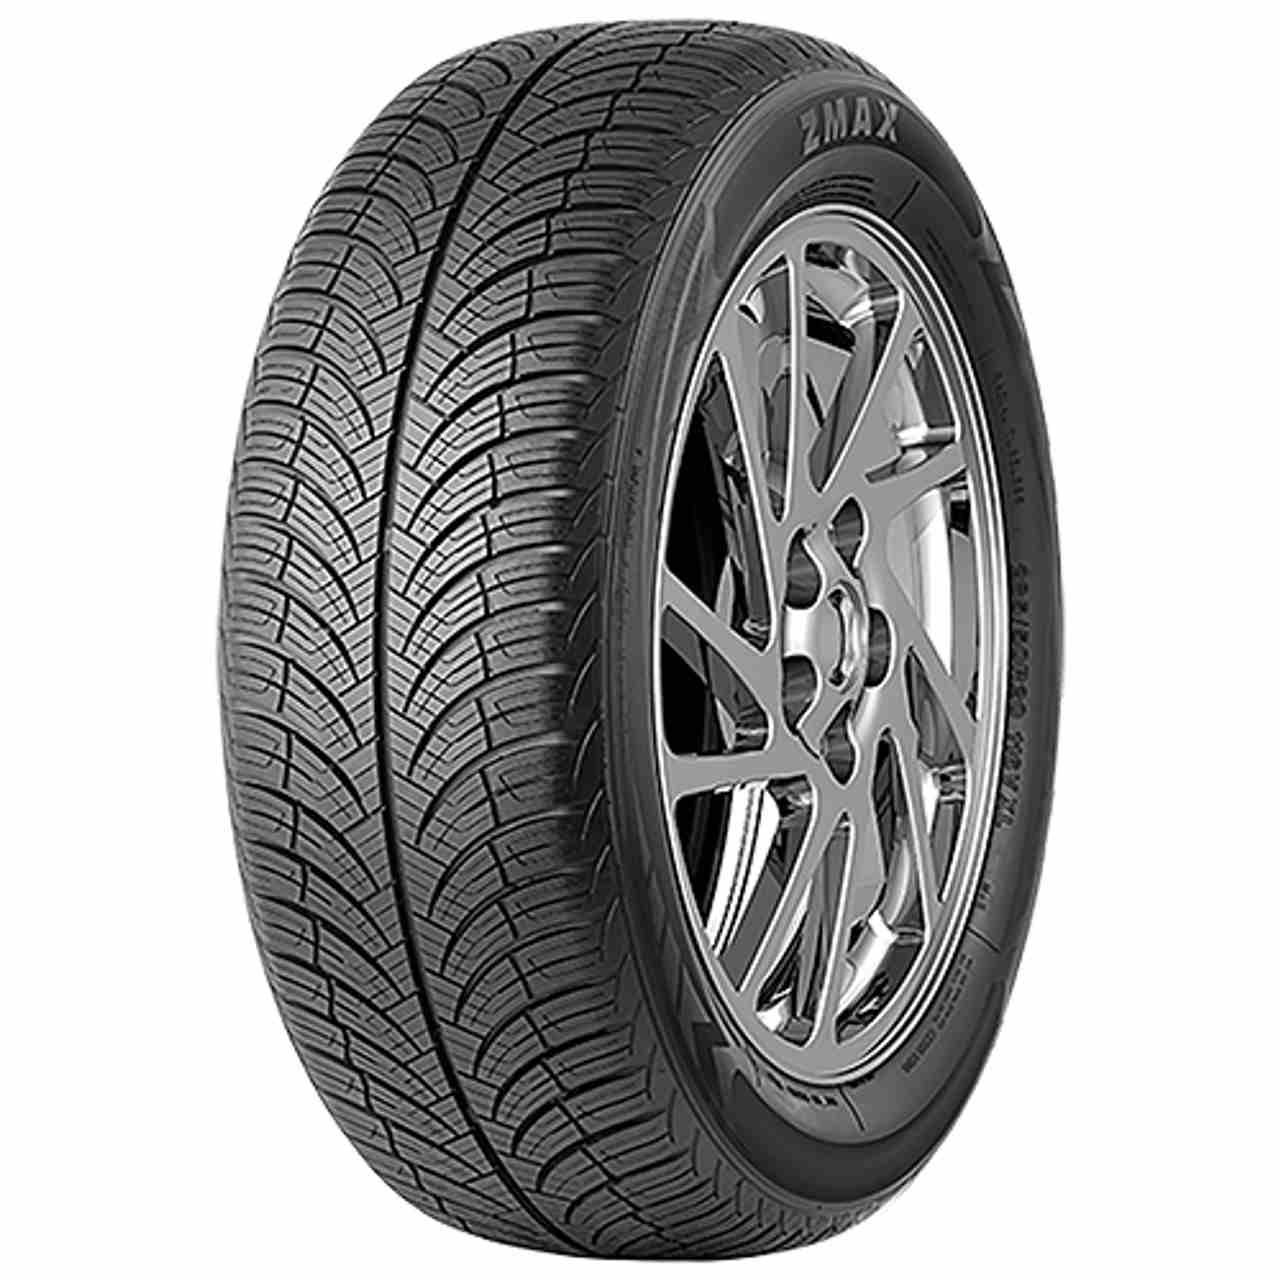 ZMAX X-SPIDER A/S 195/65R15 95V BSW XL